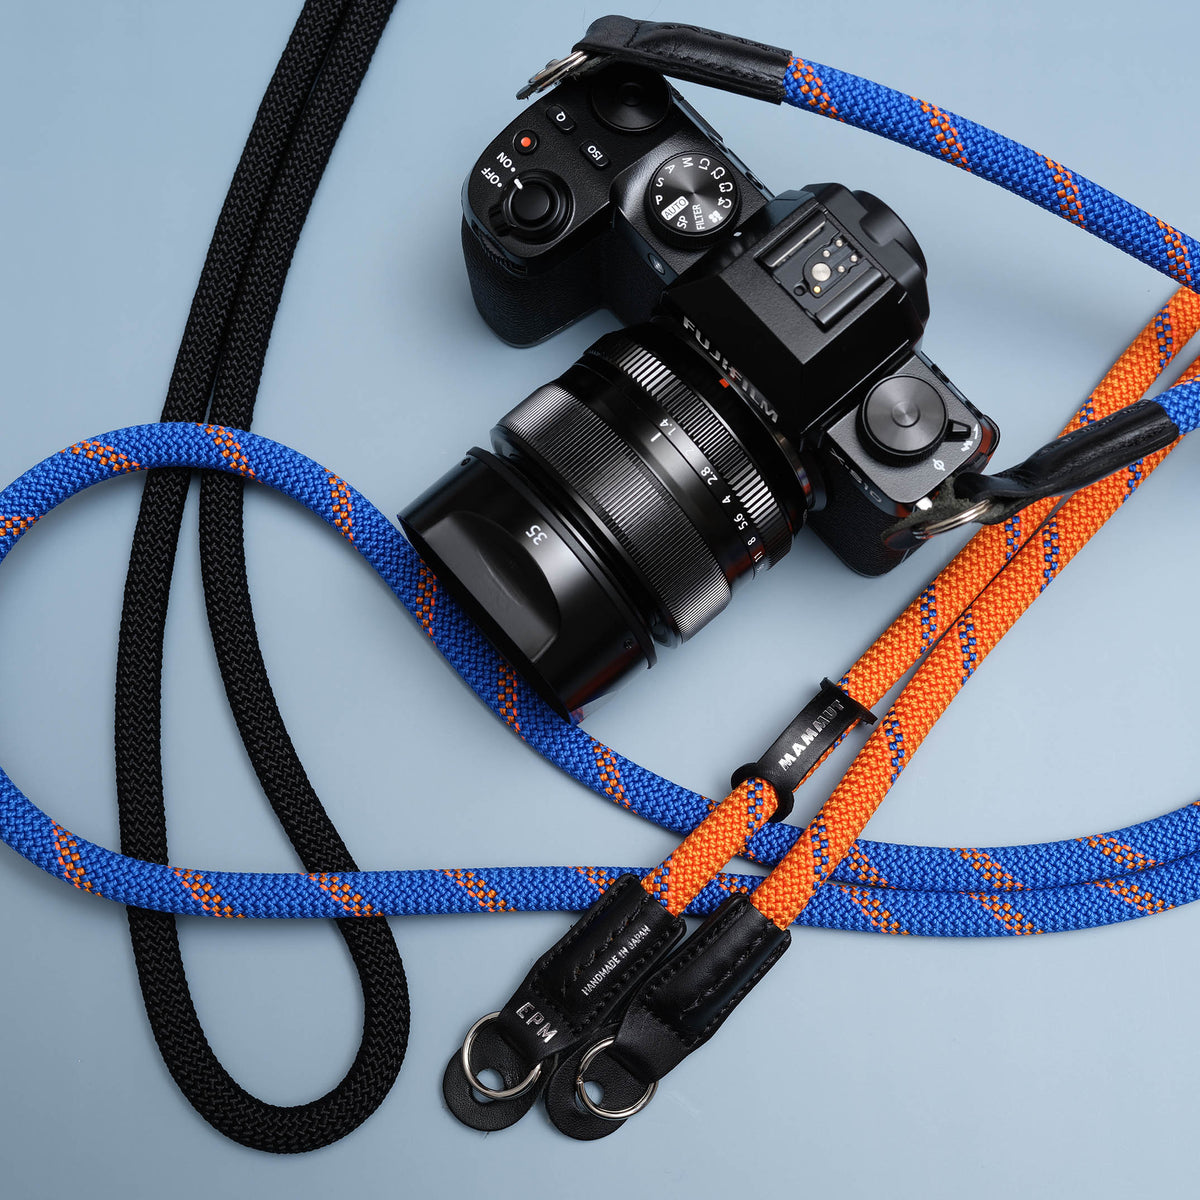 Mammut Camera Strap – Extended Photographic Material